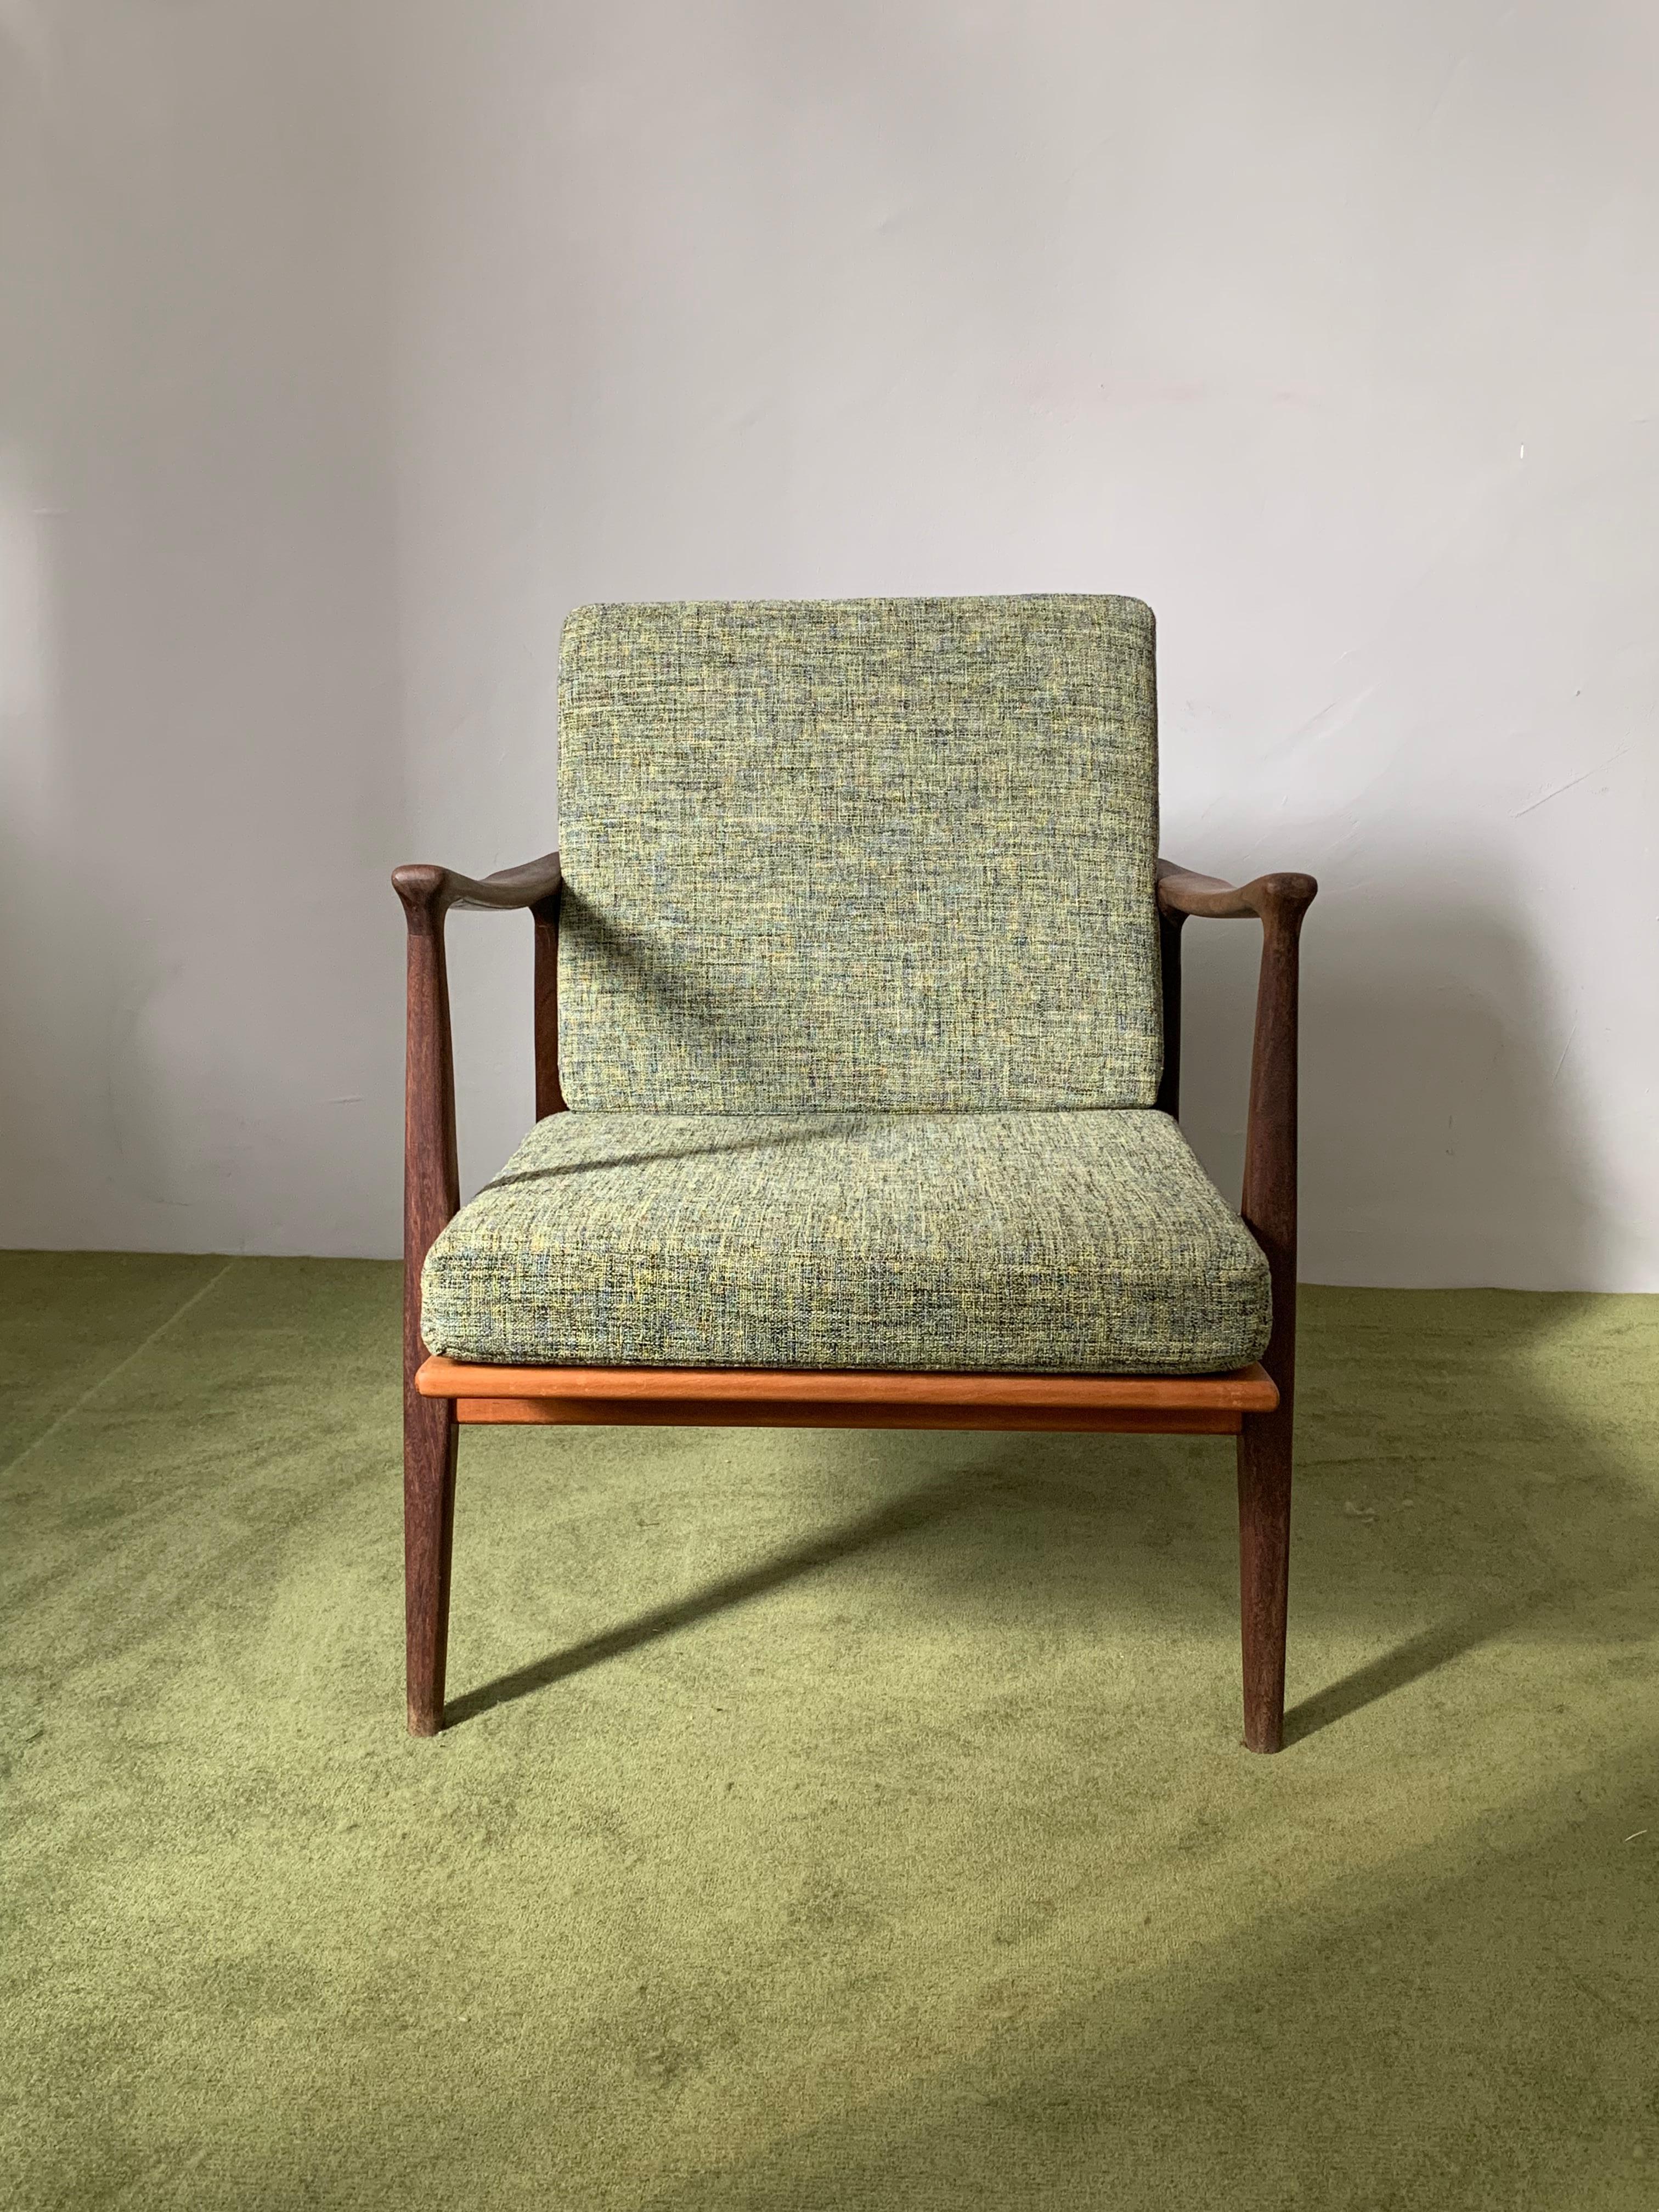 Vintage easy lounge chair by ARNE HOVMAND-OLSEN. Mogens Kold, , Denmark 
The shape characteristic of the era is, as usual, eye-catching and comfortable. Colors and materials were carefully selected during the renovation. The seat cushion and